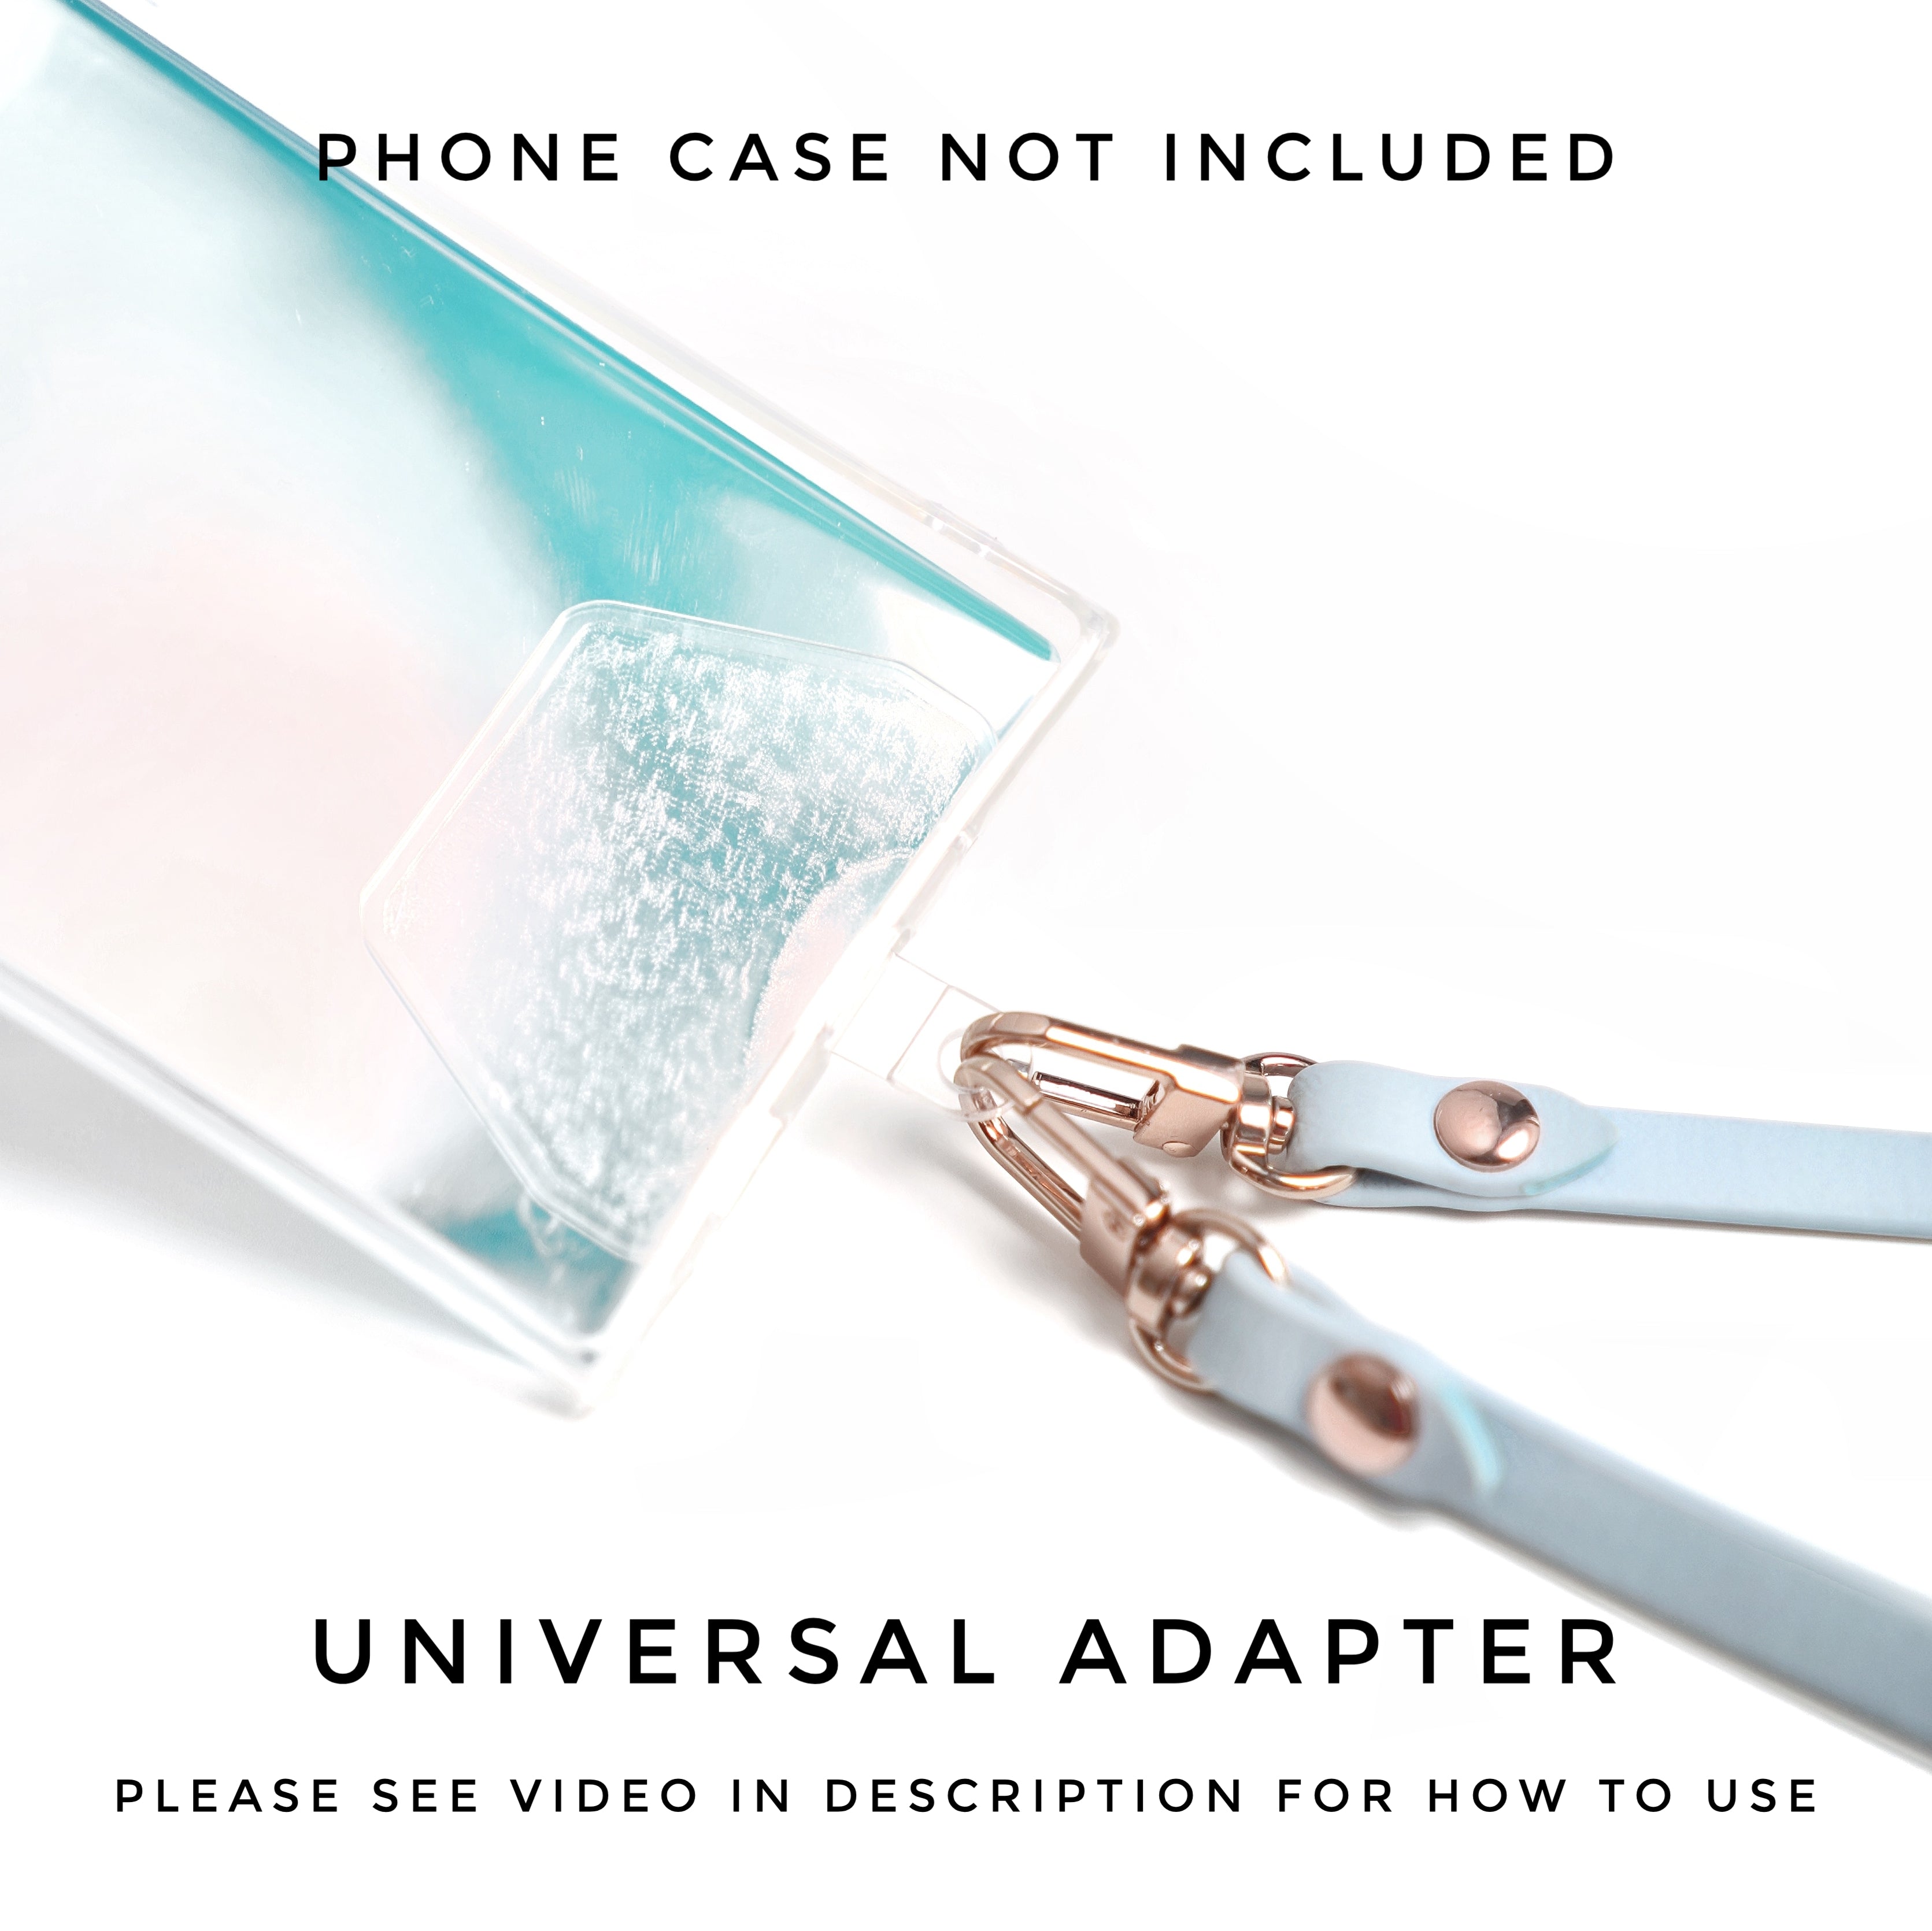 Universal Adapter for Phone Sling